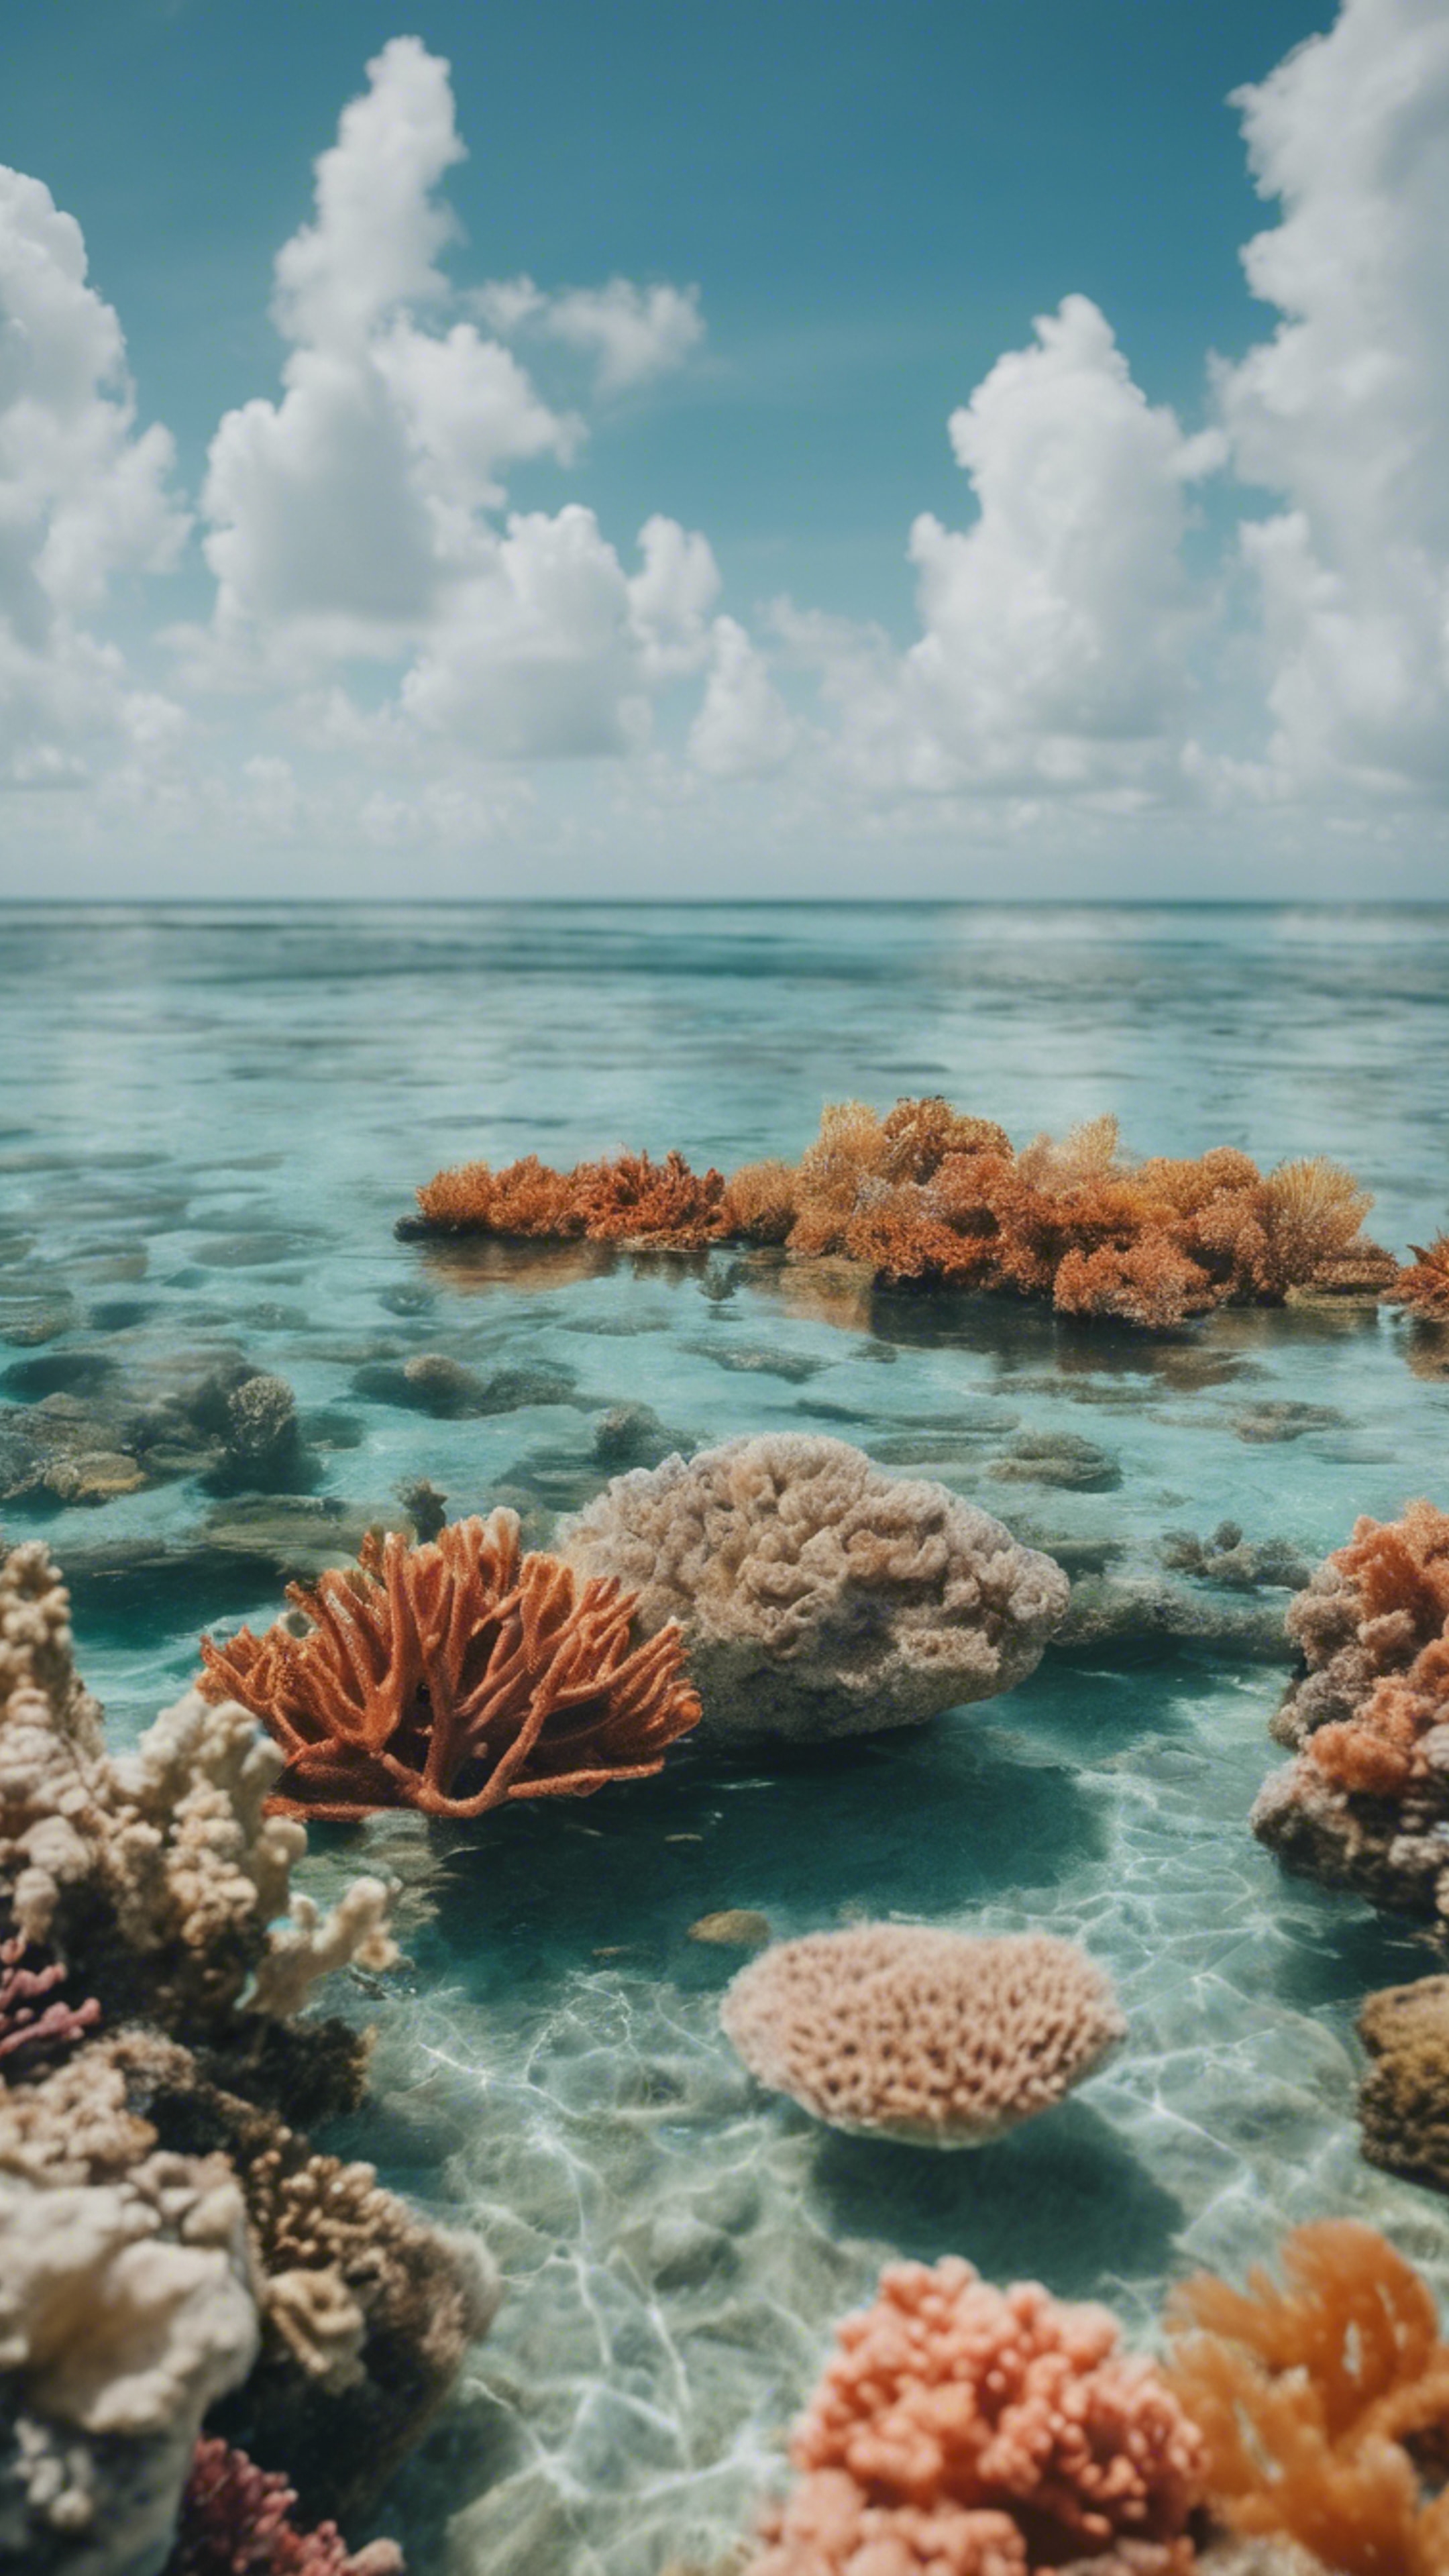 A serene view of the Florida Keys with crystal clear water and a colorful coral reef visible underwater. Валлпапер[53a9c37260d942df83c4]